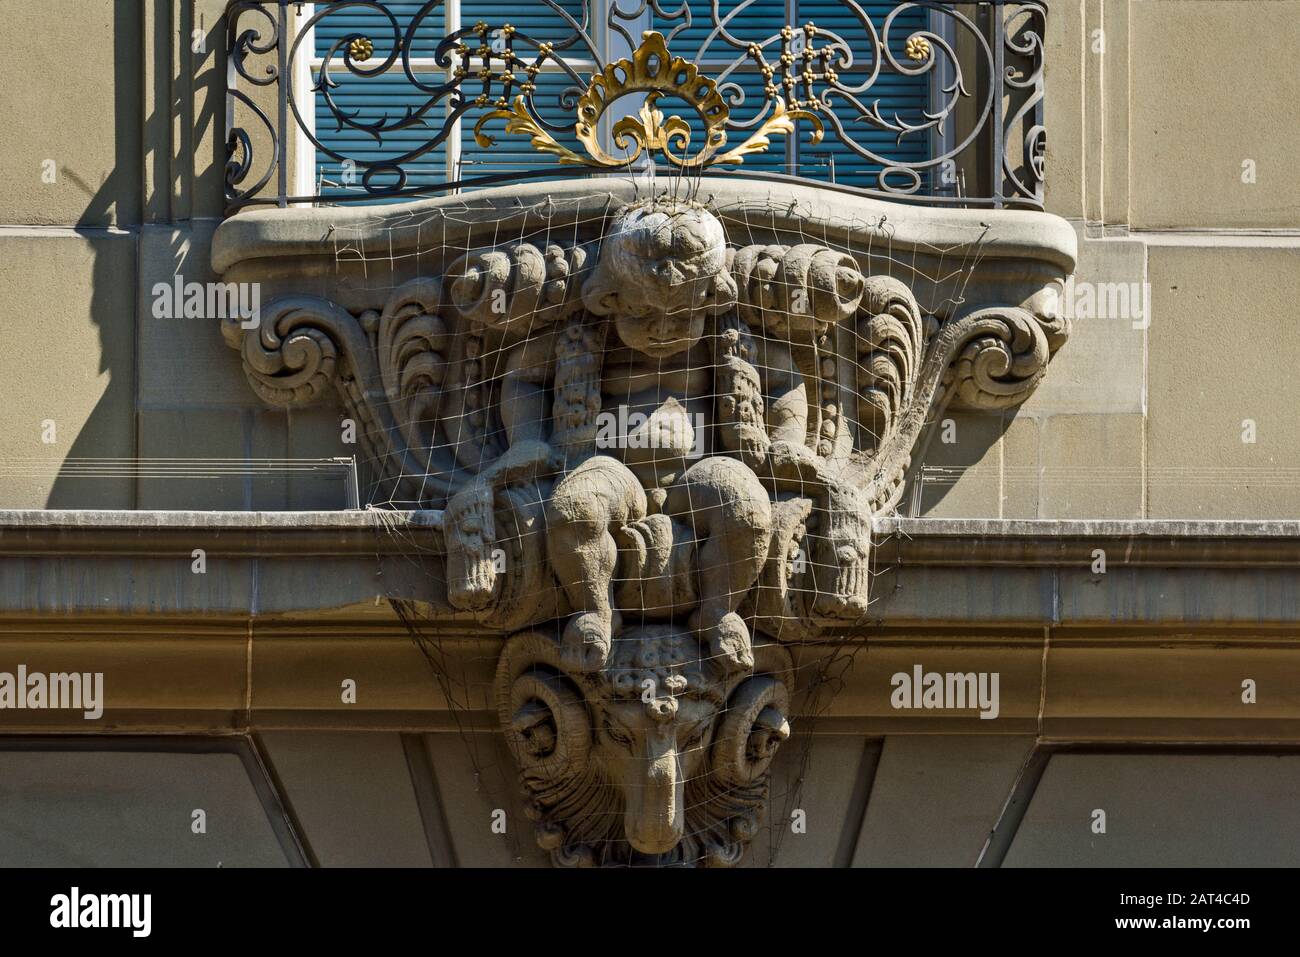 sculpture of coat of arms on a facade of the old town of Bern, Switzerland Stock Photo